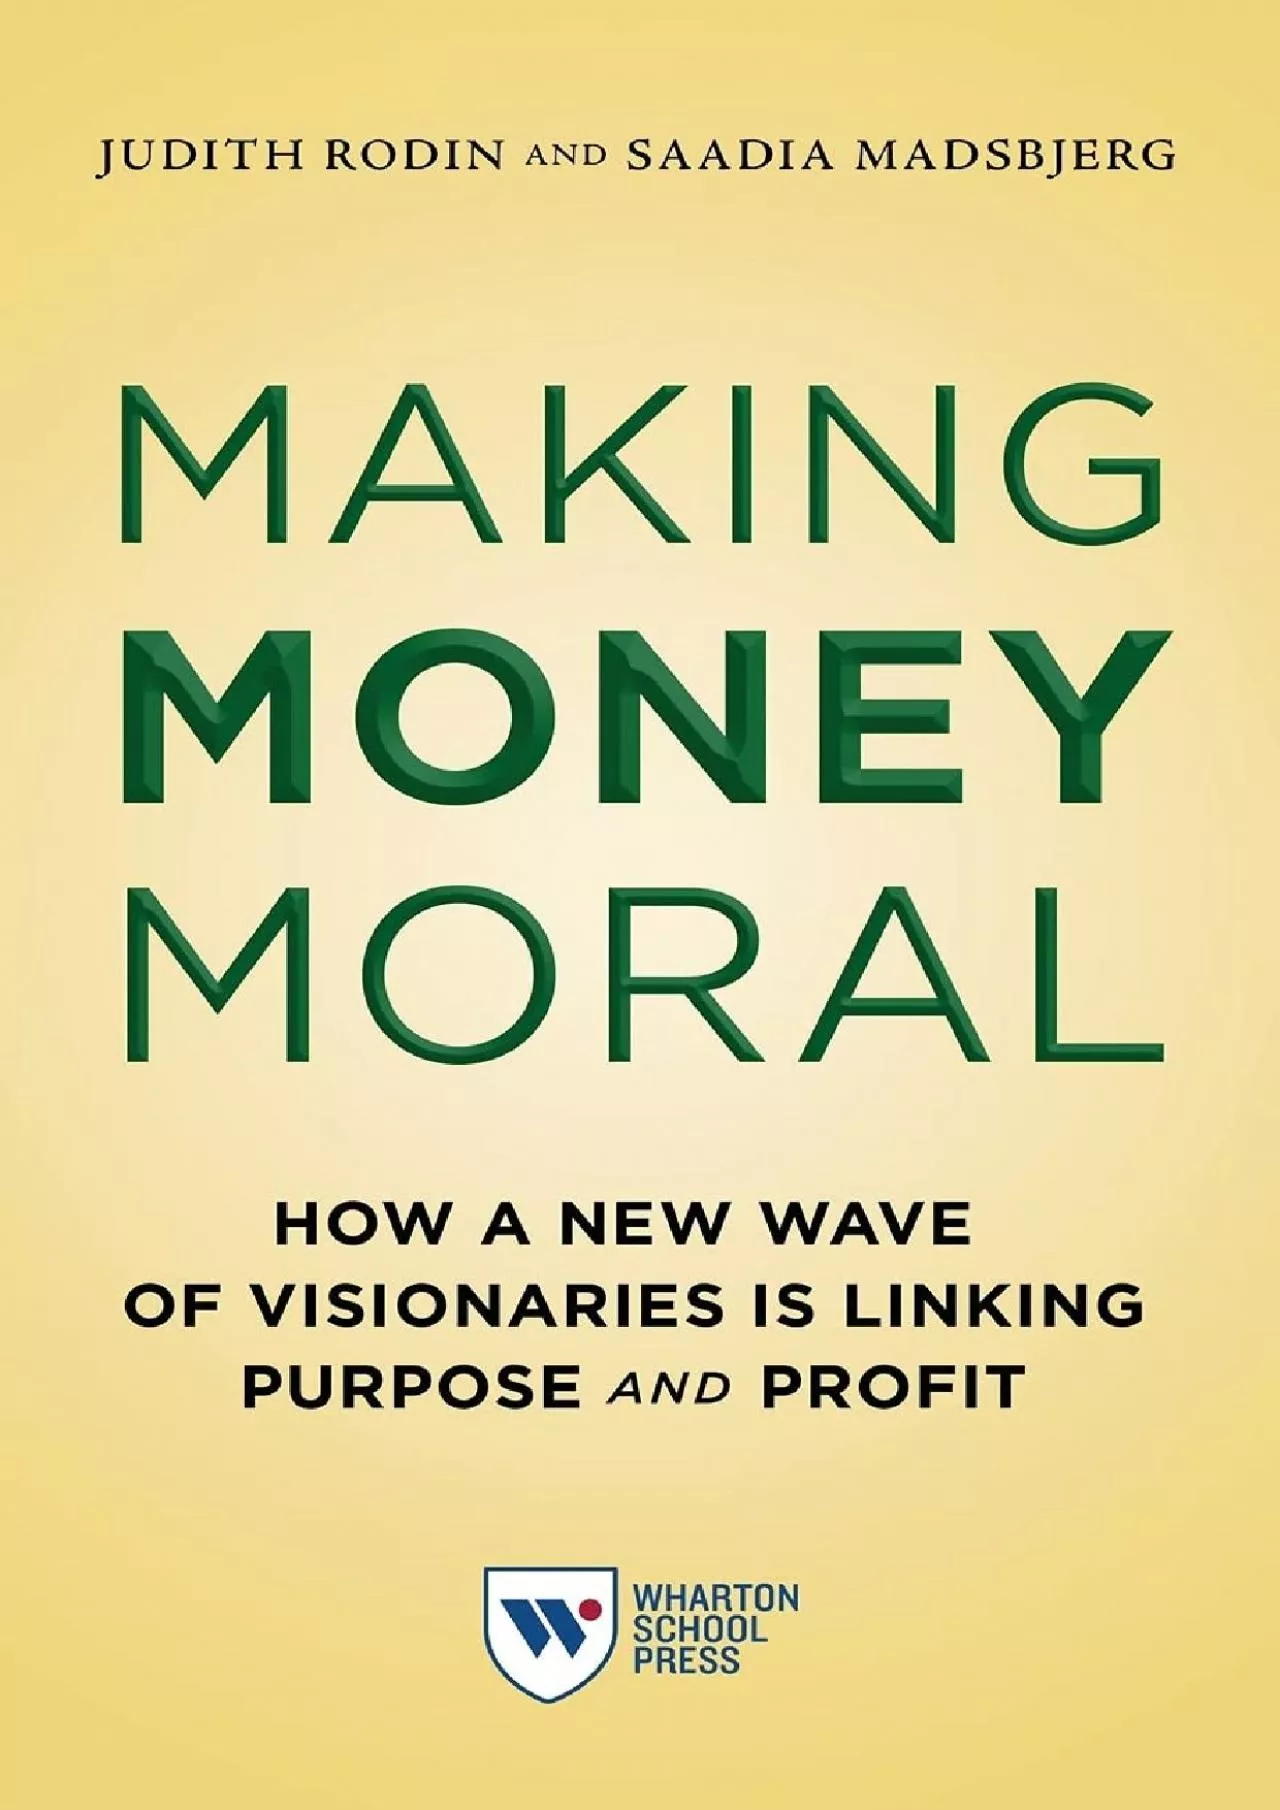 (BOOK)-Making Money Moral: How a New Wave of Visionaries Is Linking Purpose and Profit